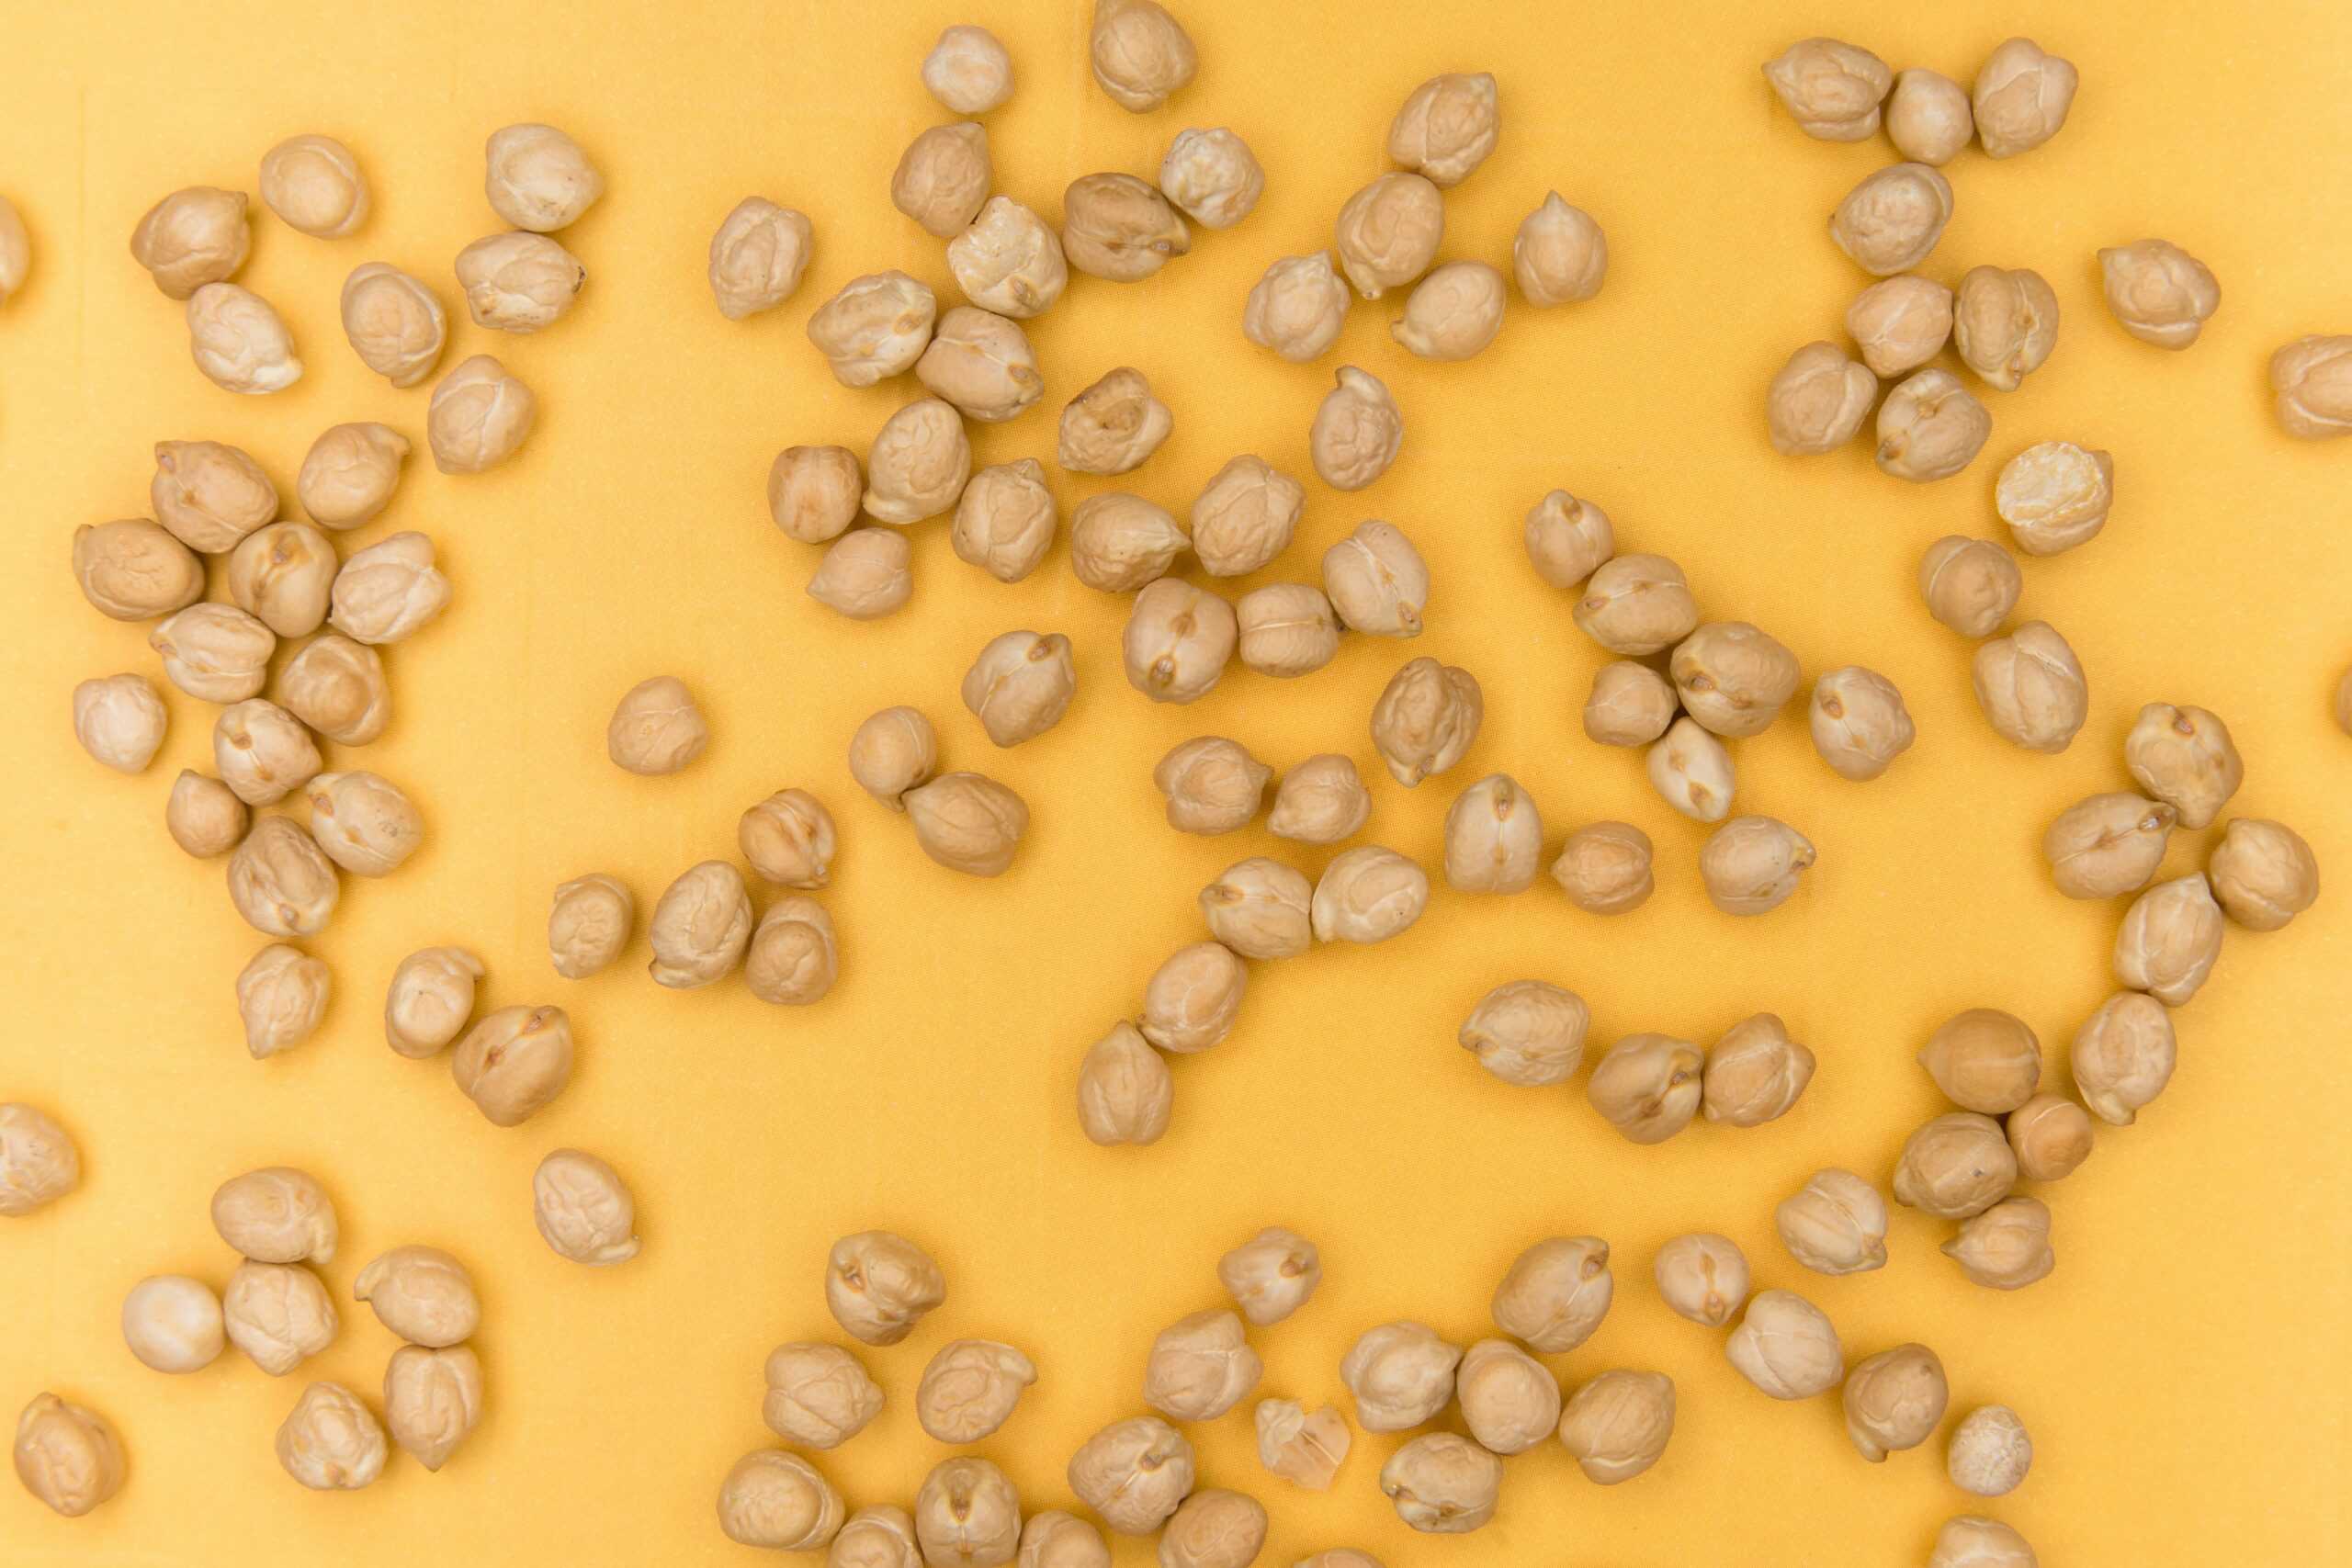 Chickpeas on a yellow backdrop. They are one of the top 10 foods for mental health.